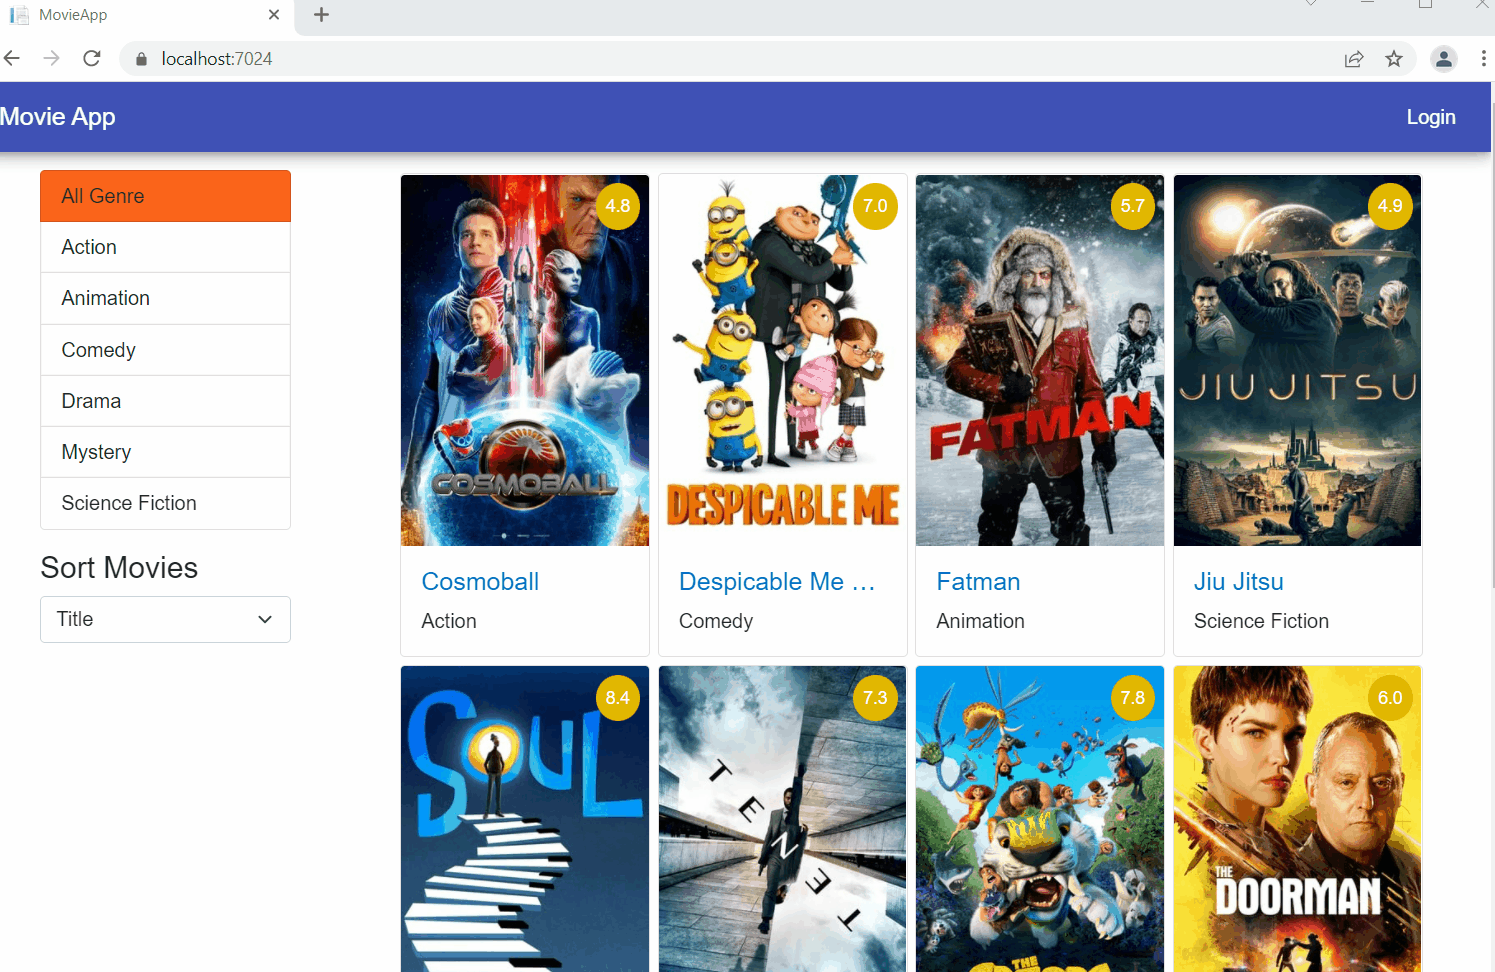 Launch the movie app and register a new user